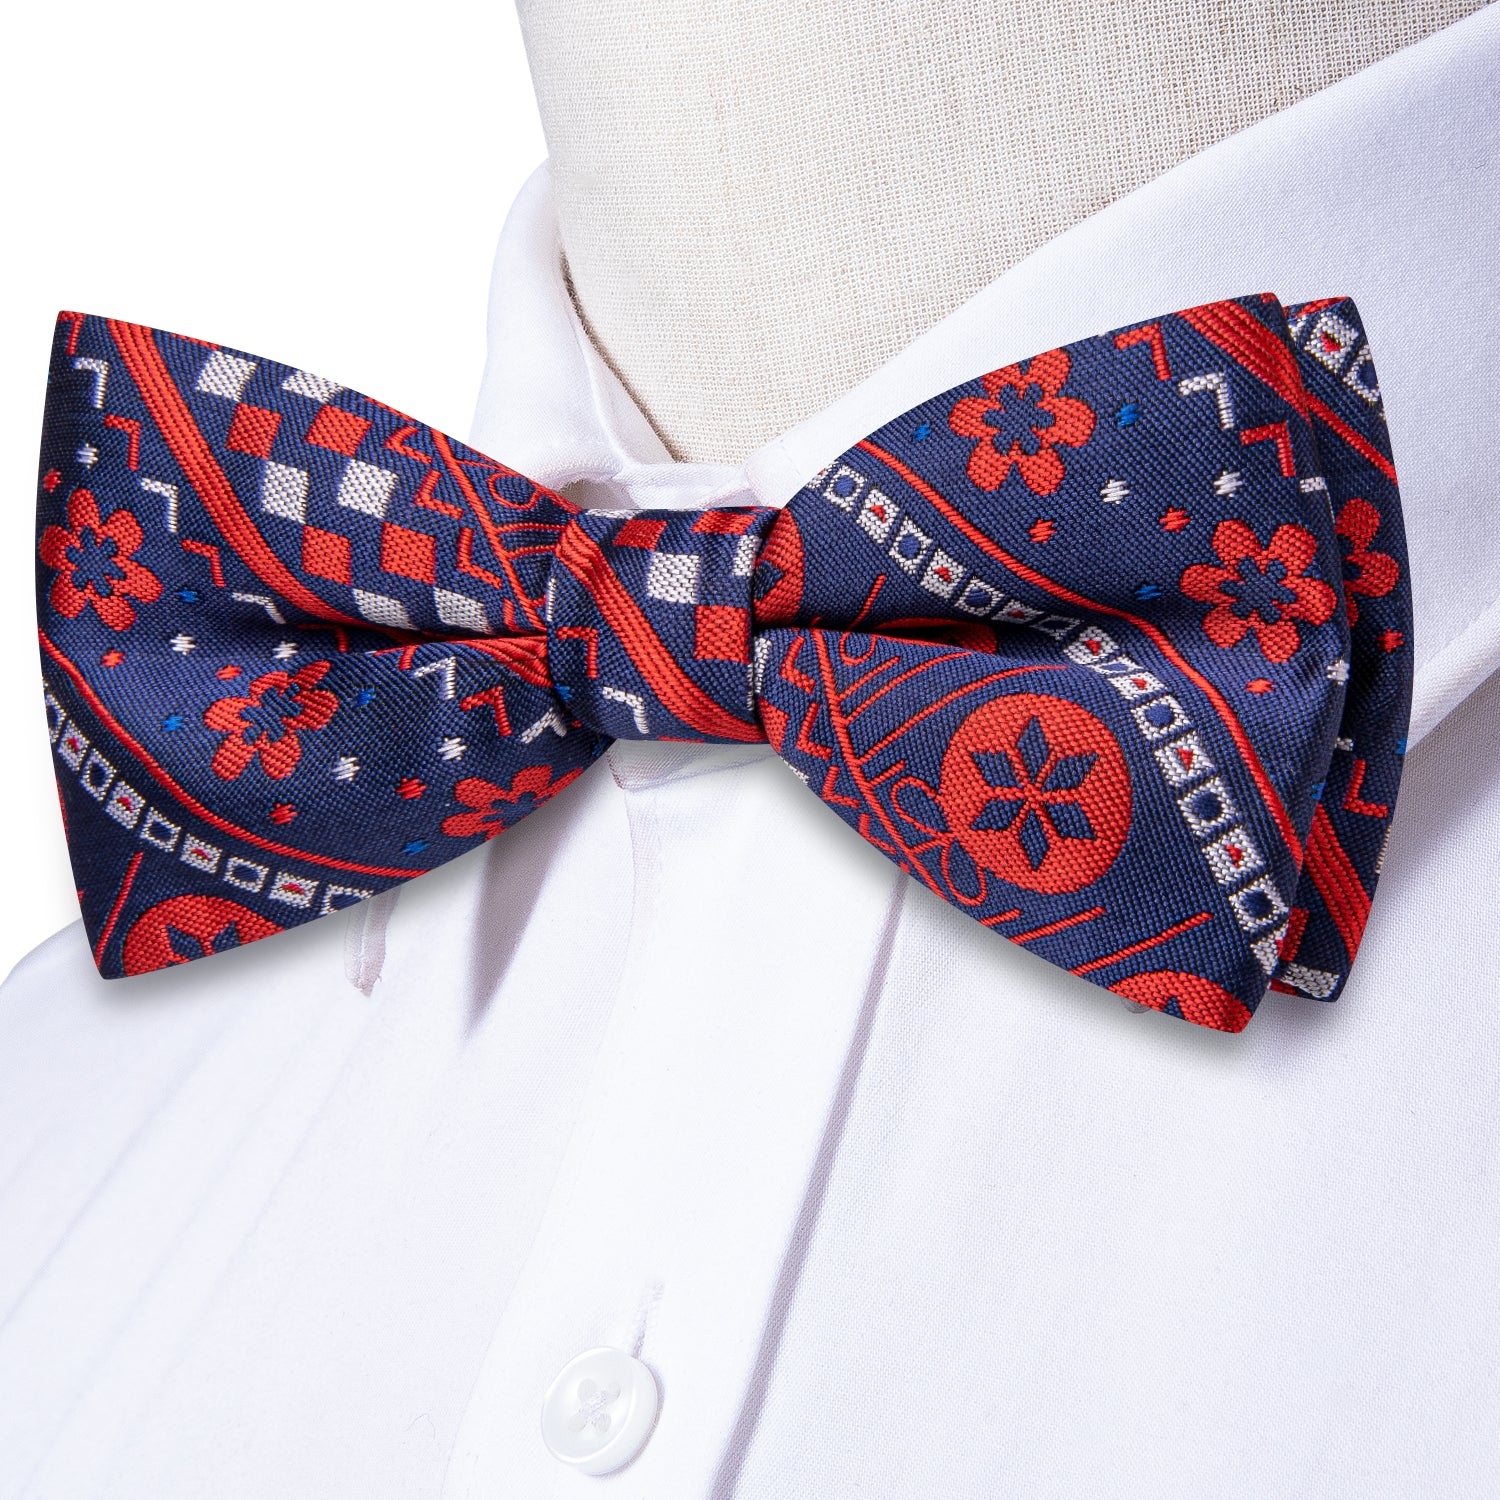 Christmas Blue Red Novelty Pre-tied Bow Tie Hanky Cufflinks Set